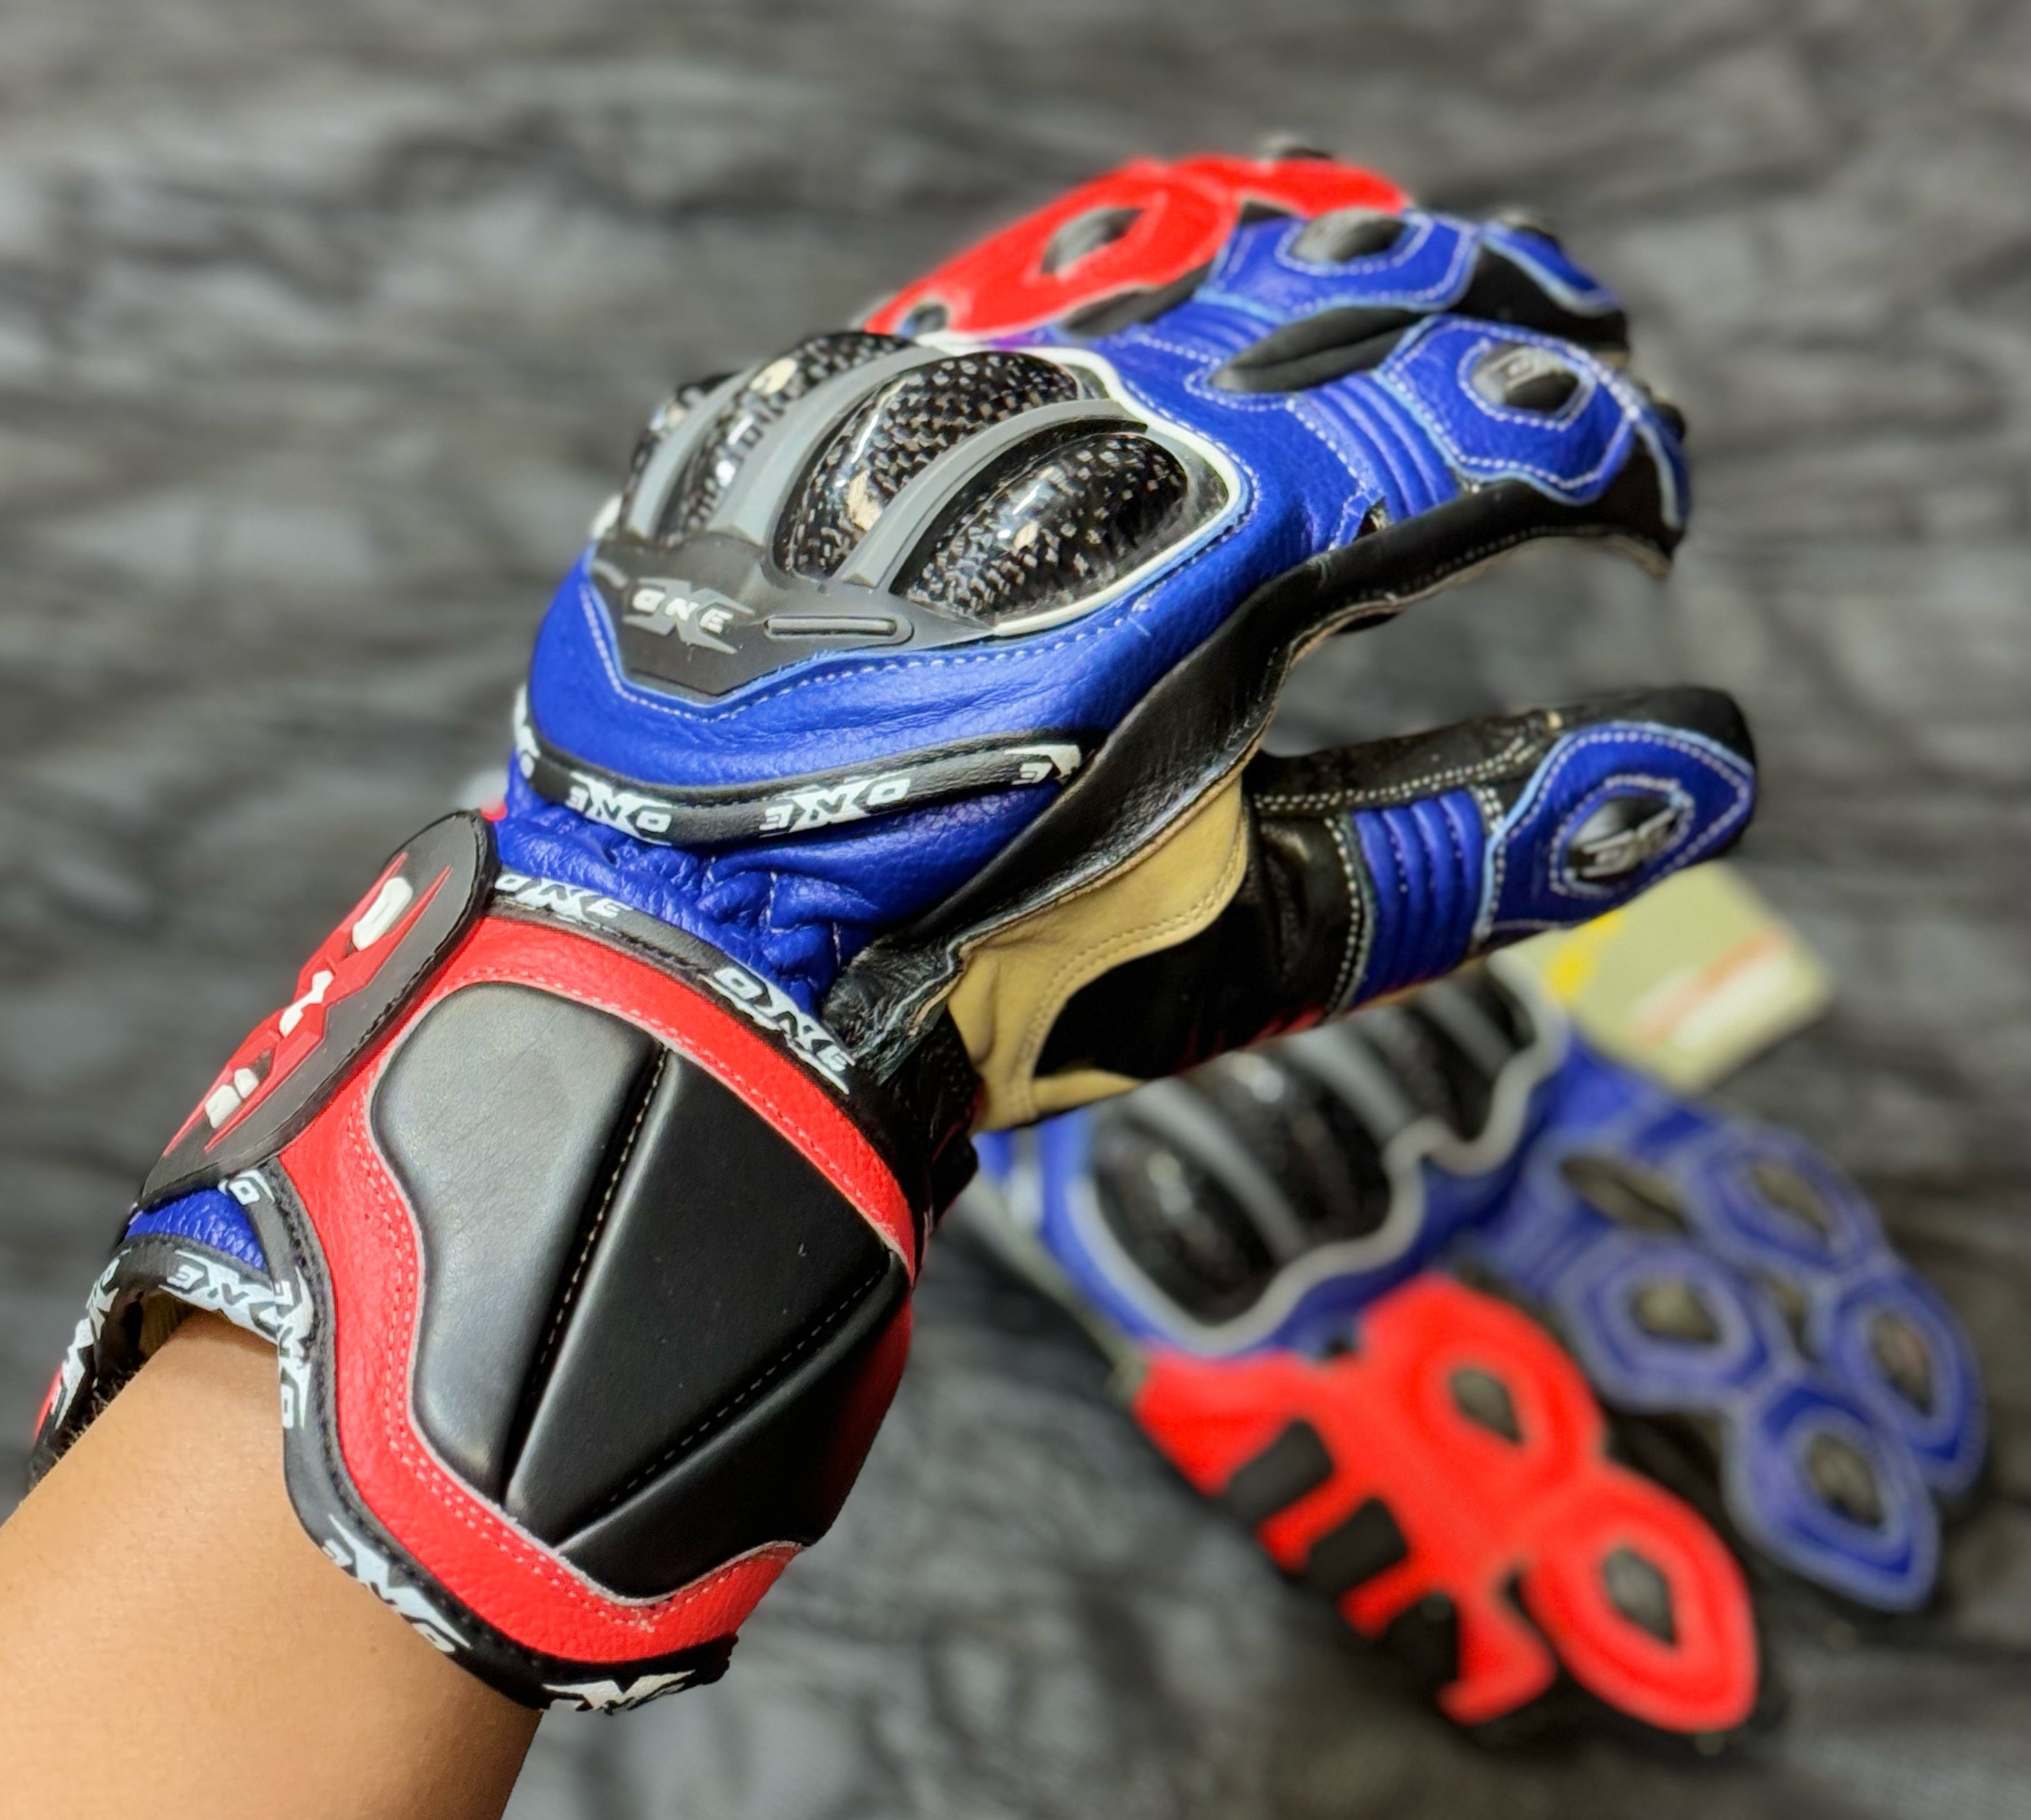 OneX USA Pro Race Gloves - Discontinued Deal